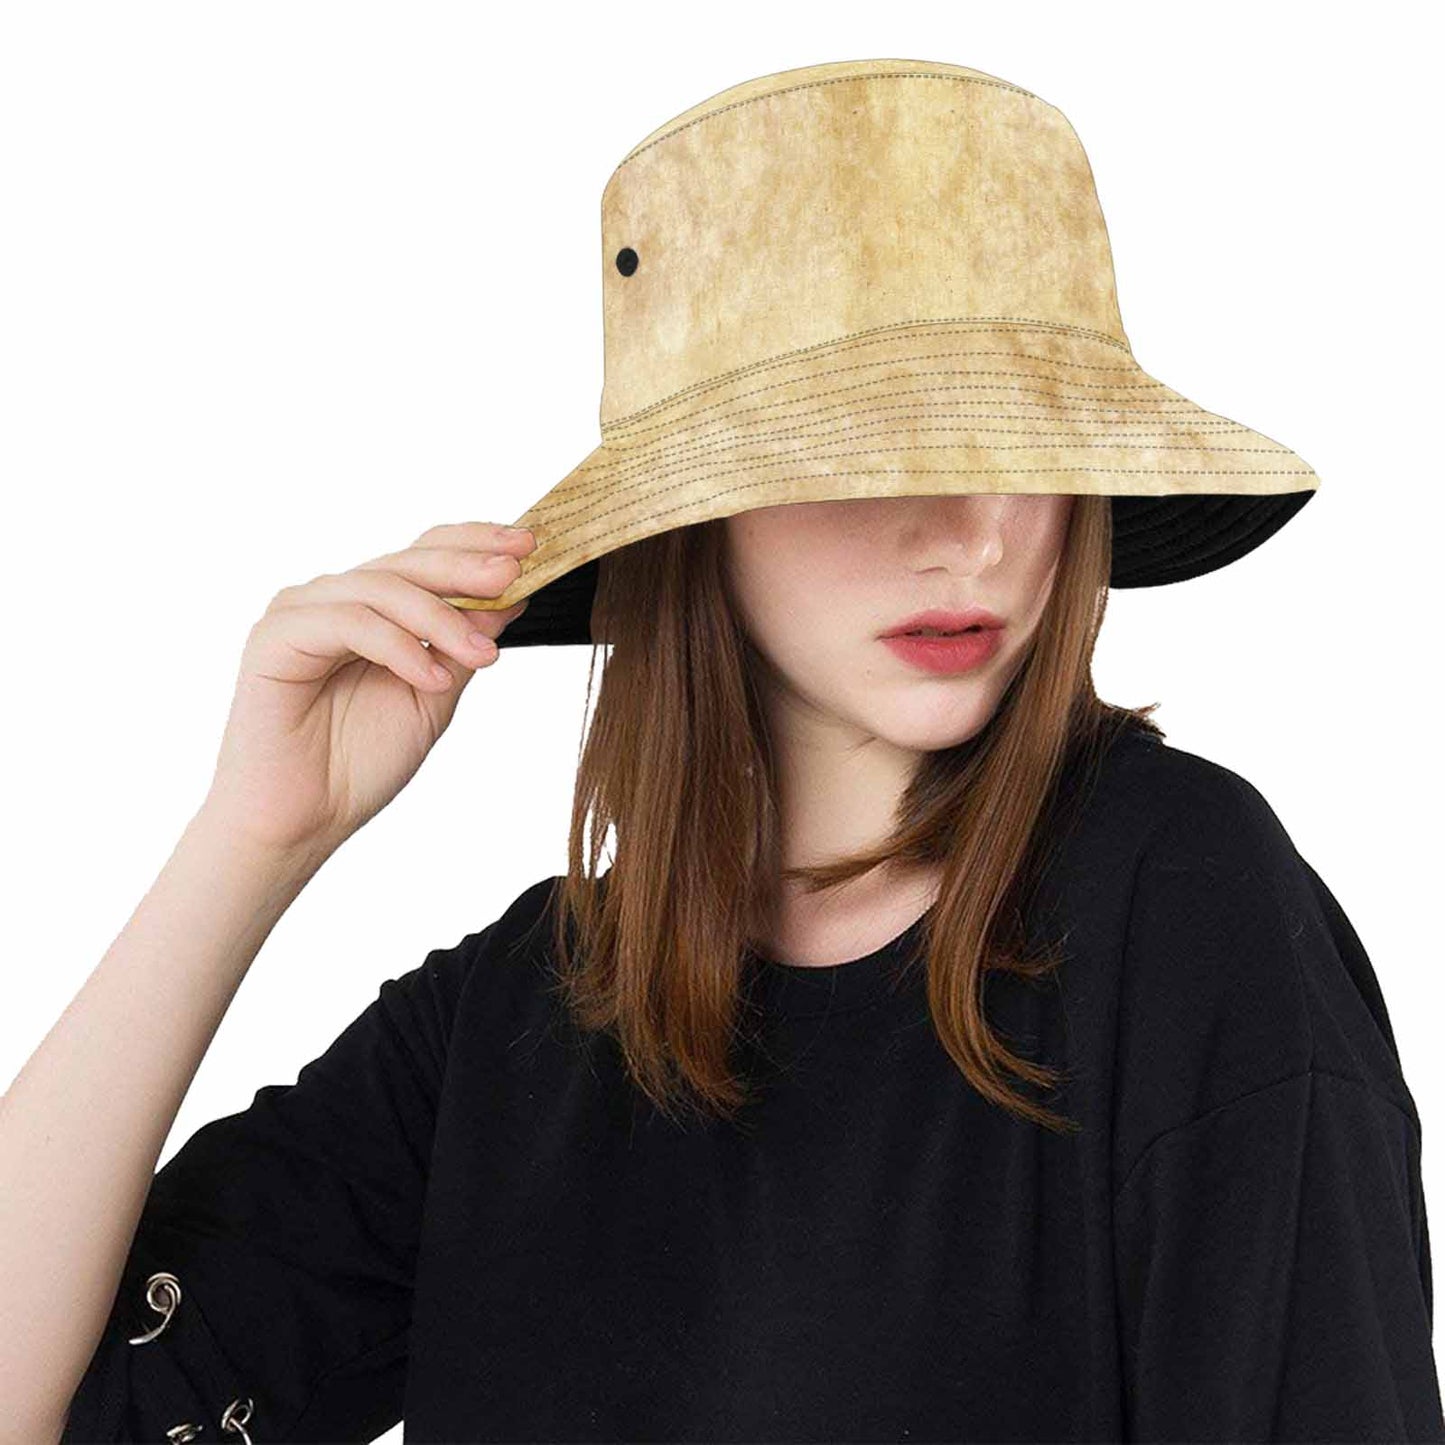 Victorian lace Bucket Hat, outdoors hat, design 29